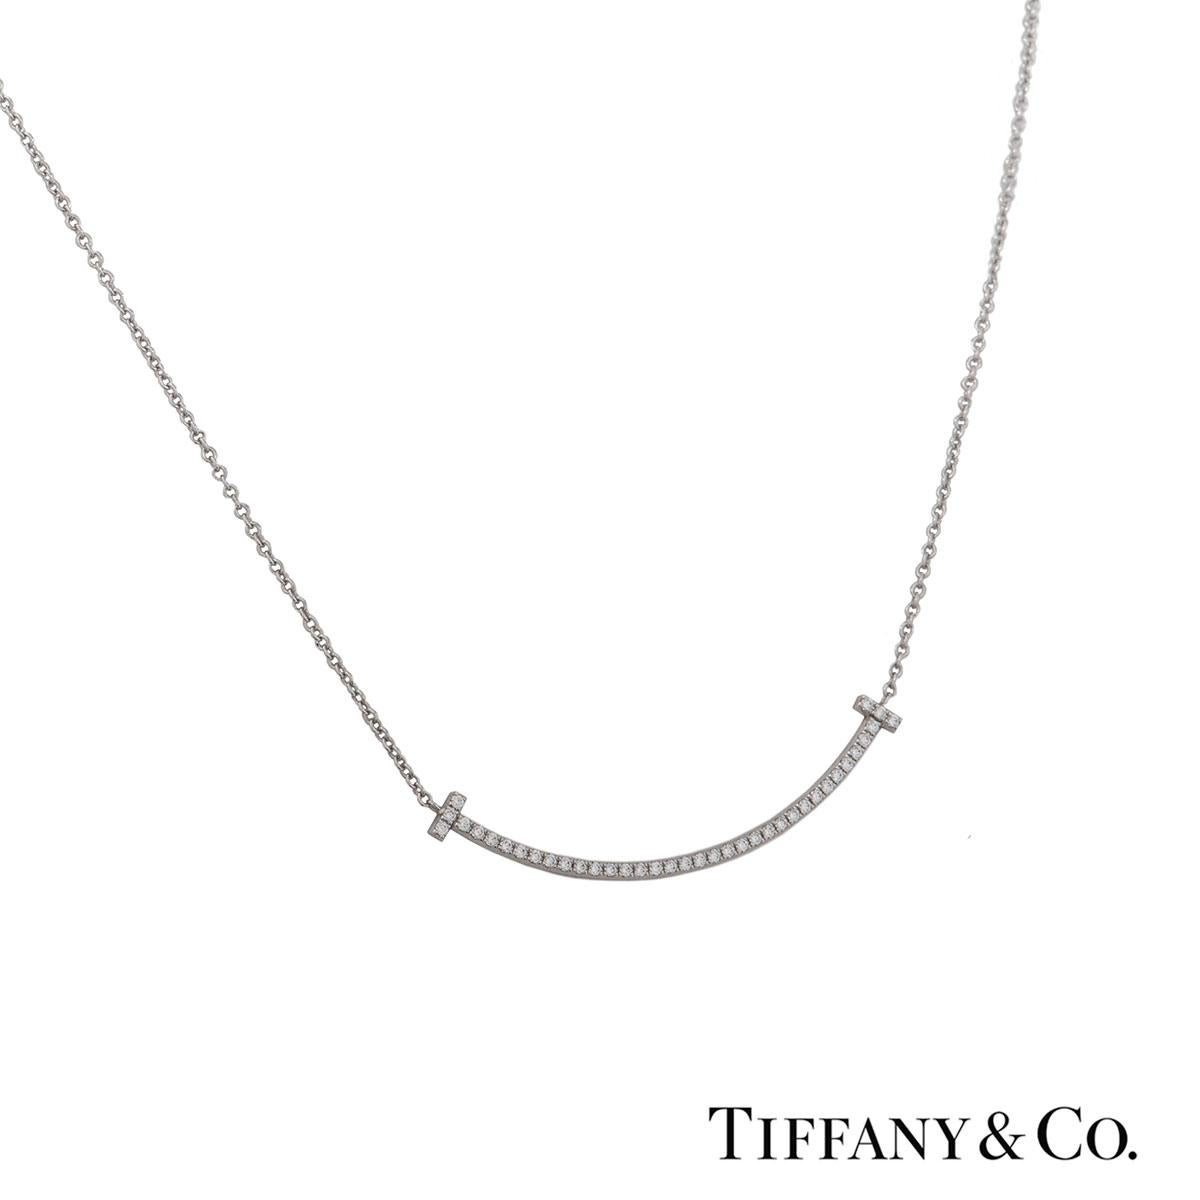 A beautiful 18k white gold diamond pendant by Tiffany & Co. from the Tiffany T collection. The pendant comprises of a smile motif set with round brilliant cut diamonds with a total weight of 0.10ct. The pendant features a bolt spring clasp with a